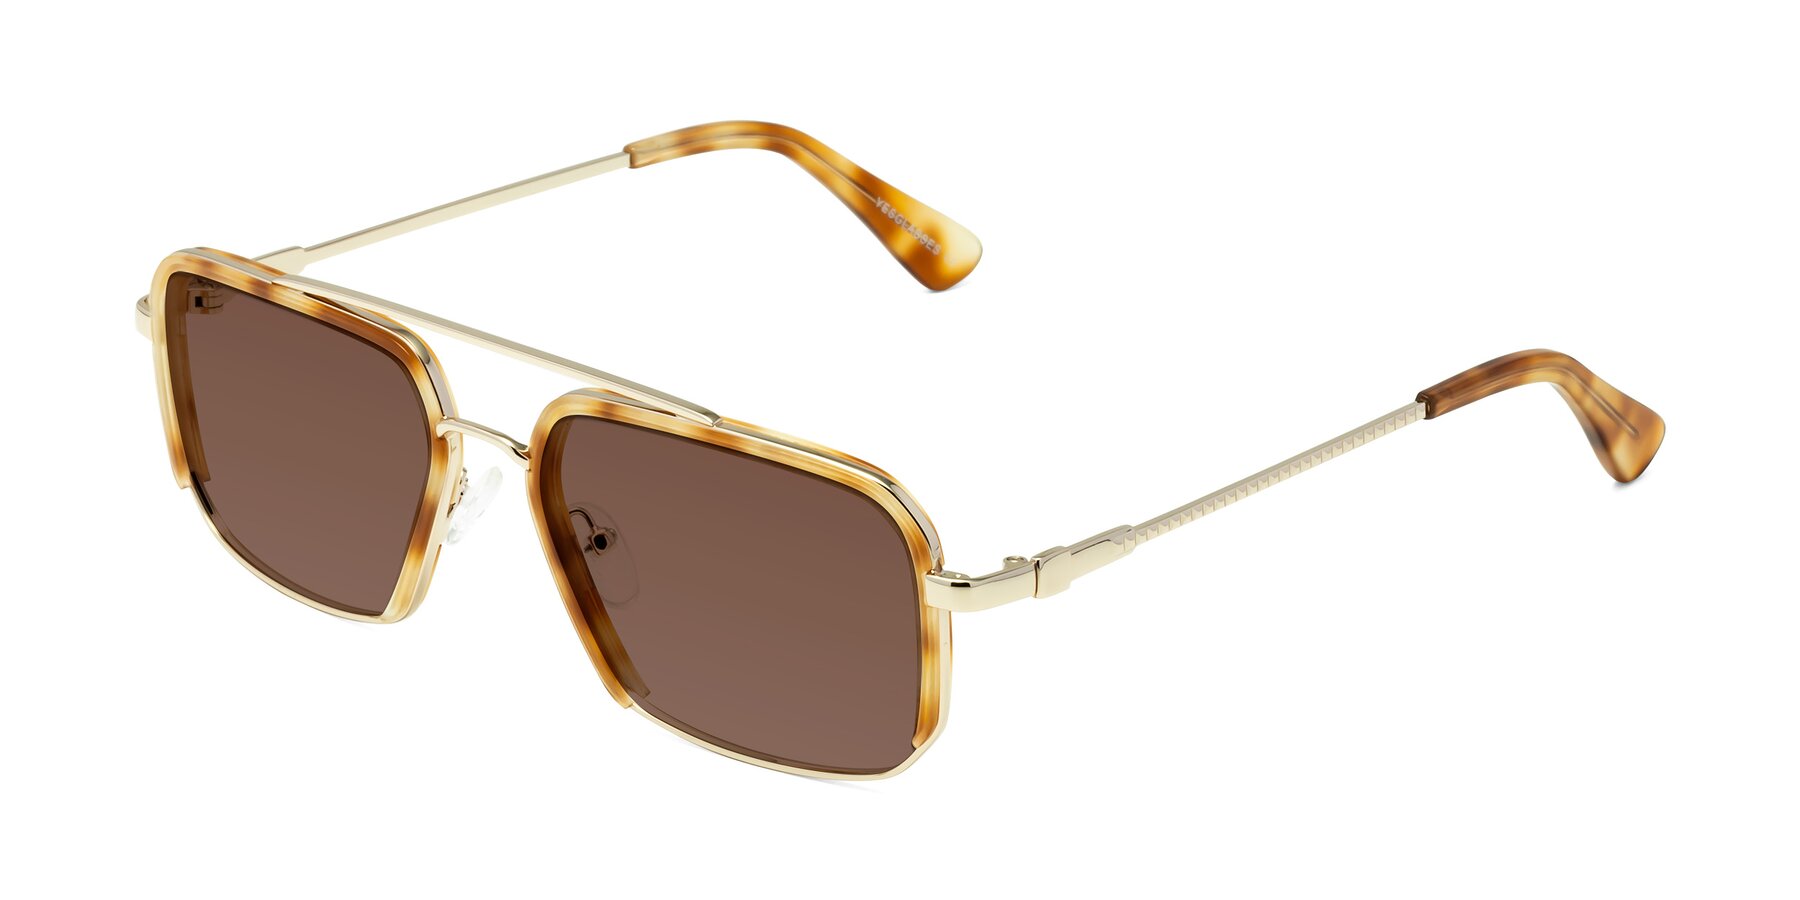 Angle of Dechter in Yellow Tortoise-Gold with Brown Tinted Lenses